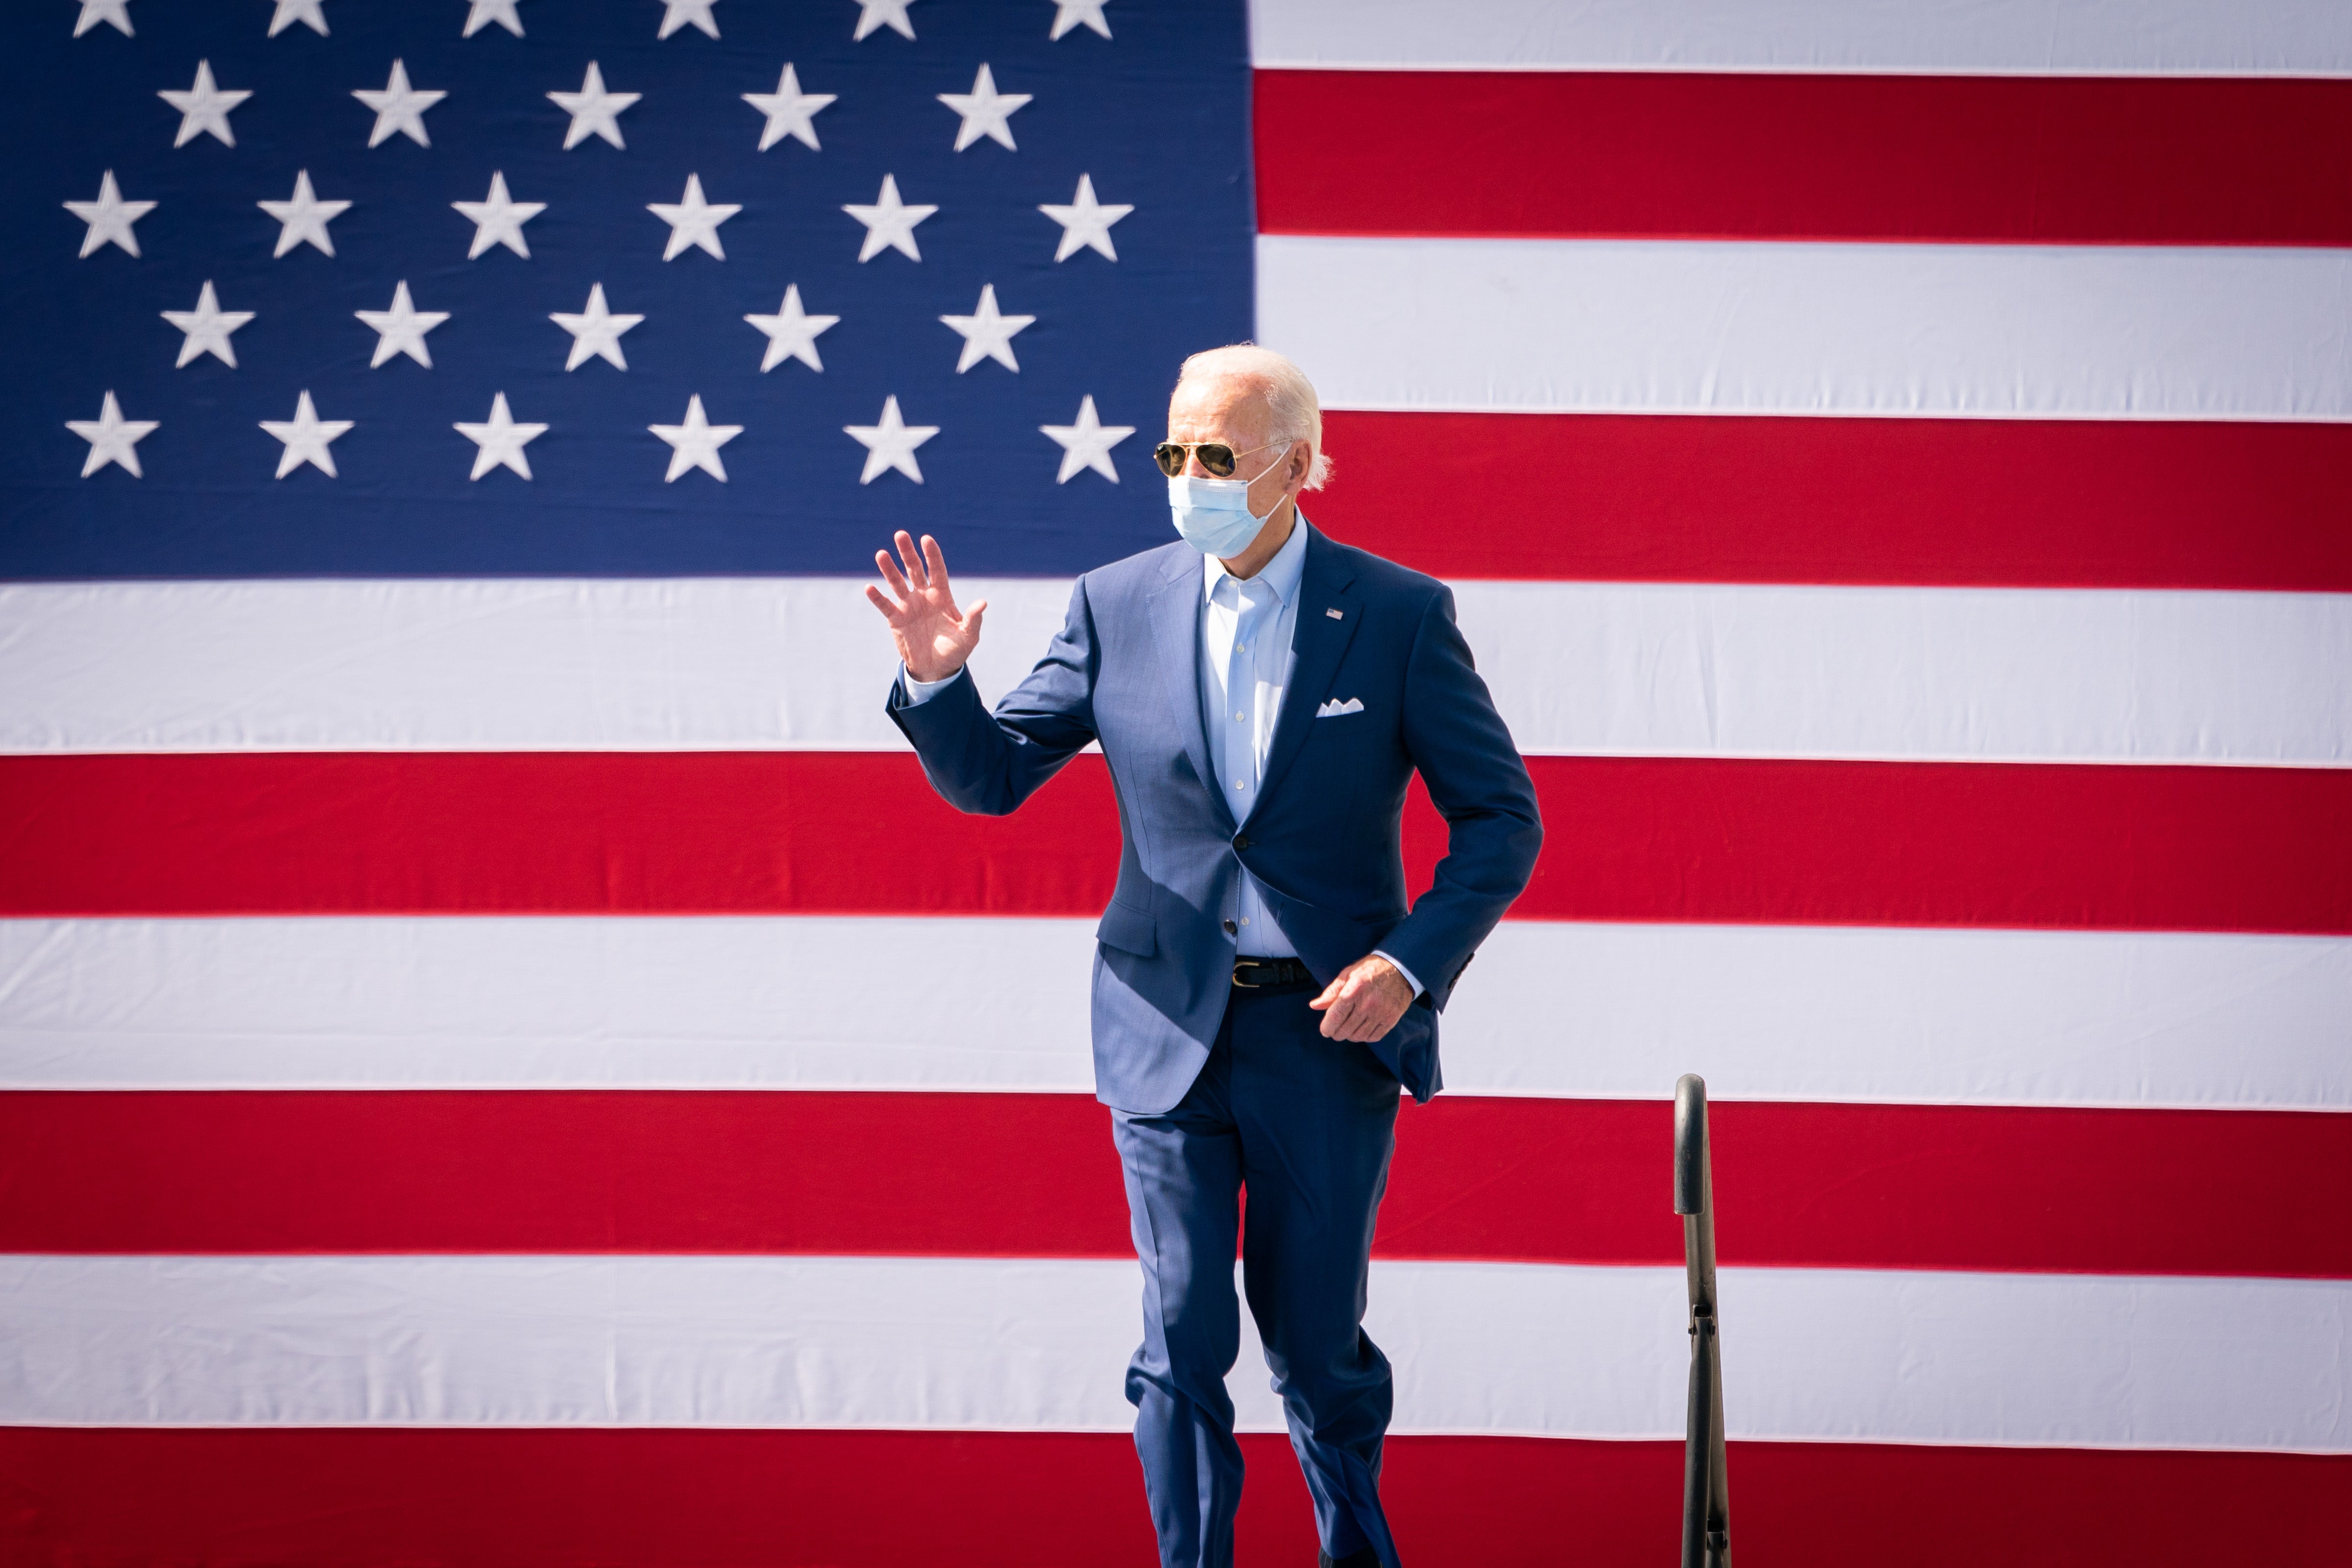 Joe Biden waves to a crowd of supporters at a campaign rally while wearing a mask